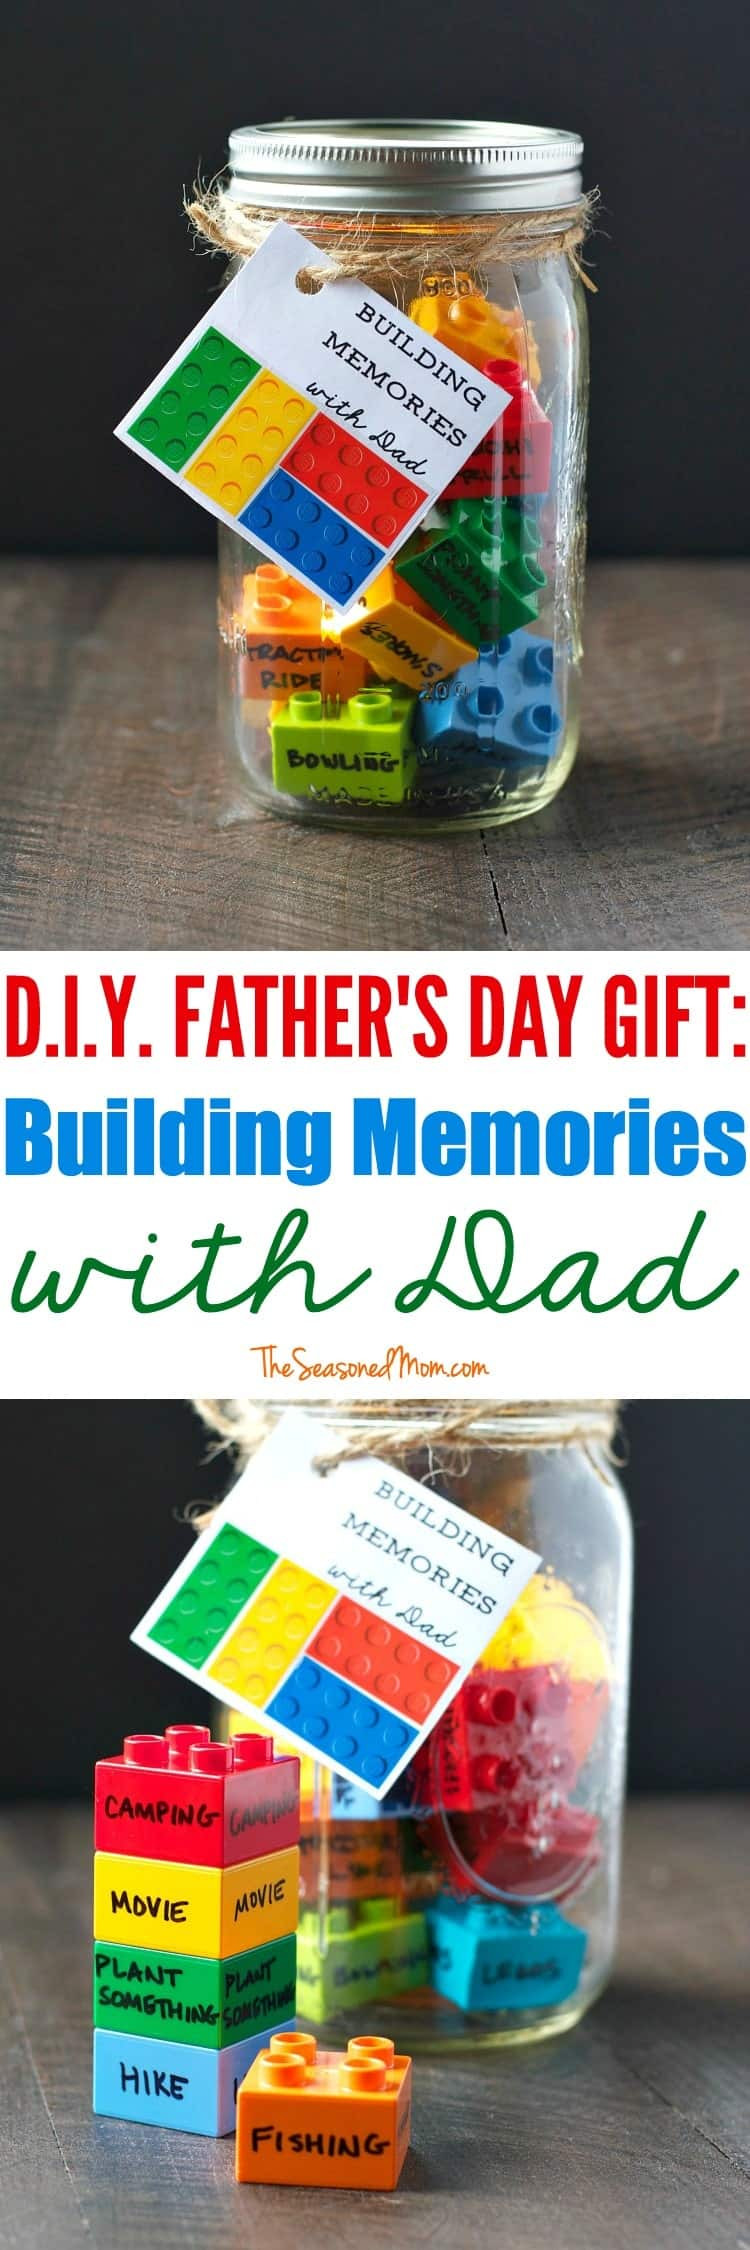 Fathers Day Diy Gift Ideas
 DIY Father s Day Gift Building Memories with Dad The